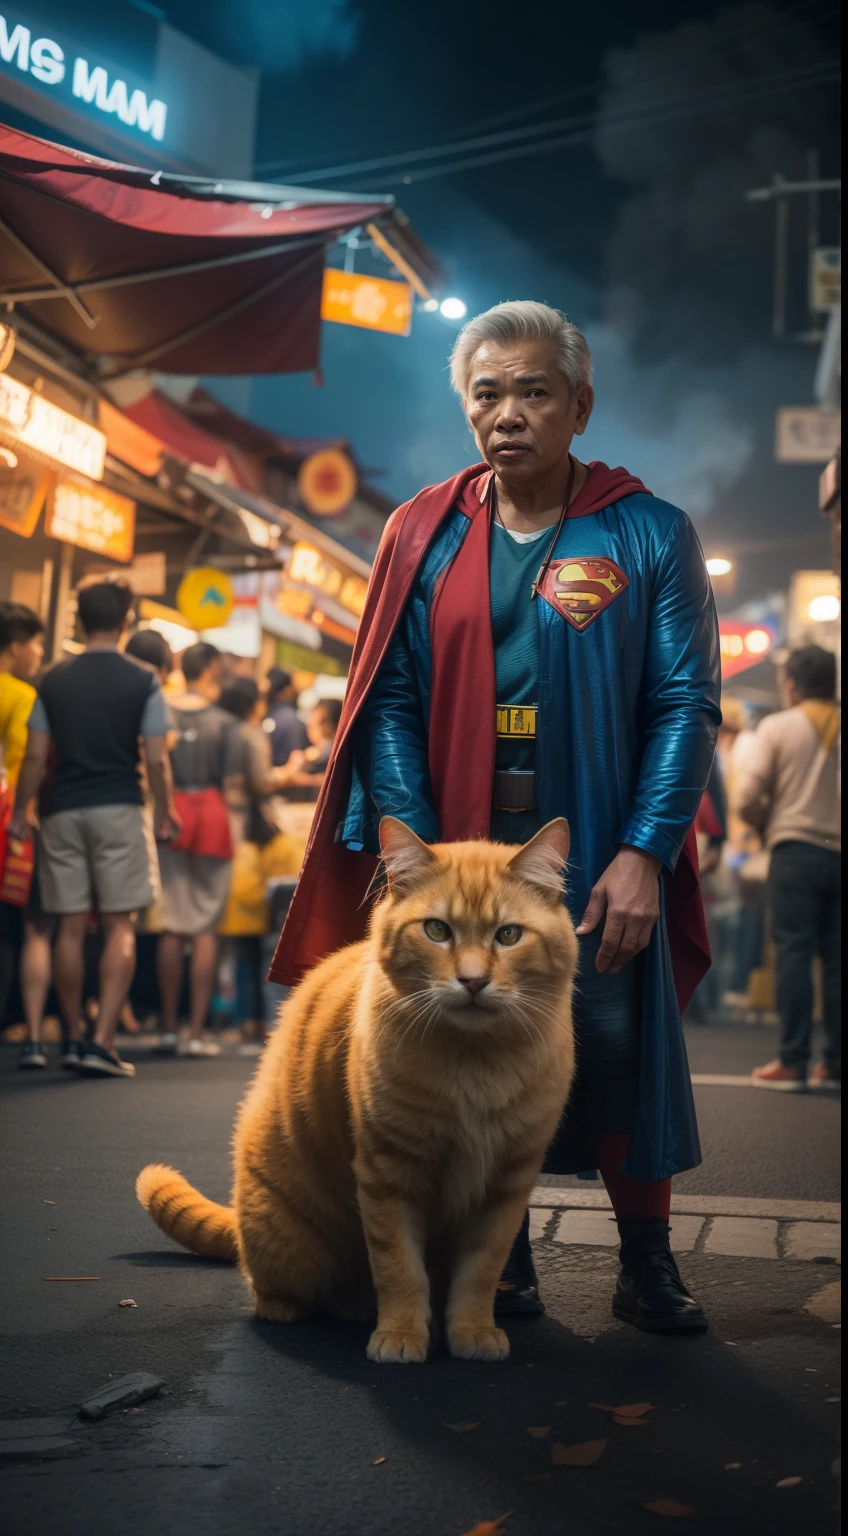 a 70 years old malay man in superman costume outfit standing in front of a bustling crowded 夜 market holding a yellow big fluffy cat, 夜, 真剣な顔, 夜time, スーパーマン映画風に, 超リアルな写真, 劇的な効果, 背景の煙の効果, ダークカラーグレーディング, 全身, 8k, クローズアップショット, 超クローズアップ写真